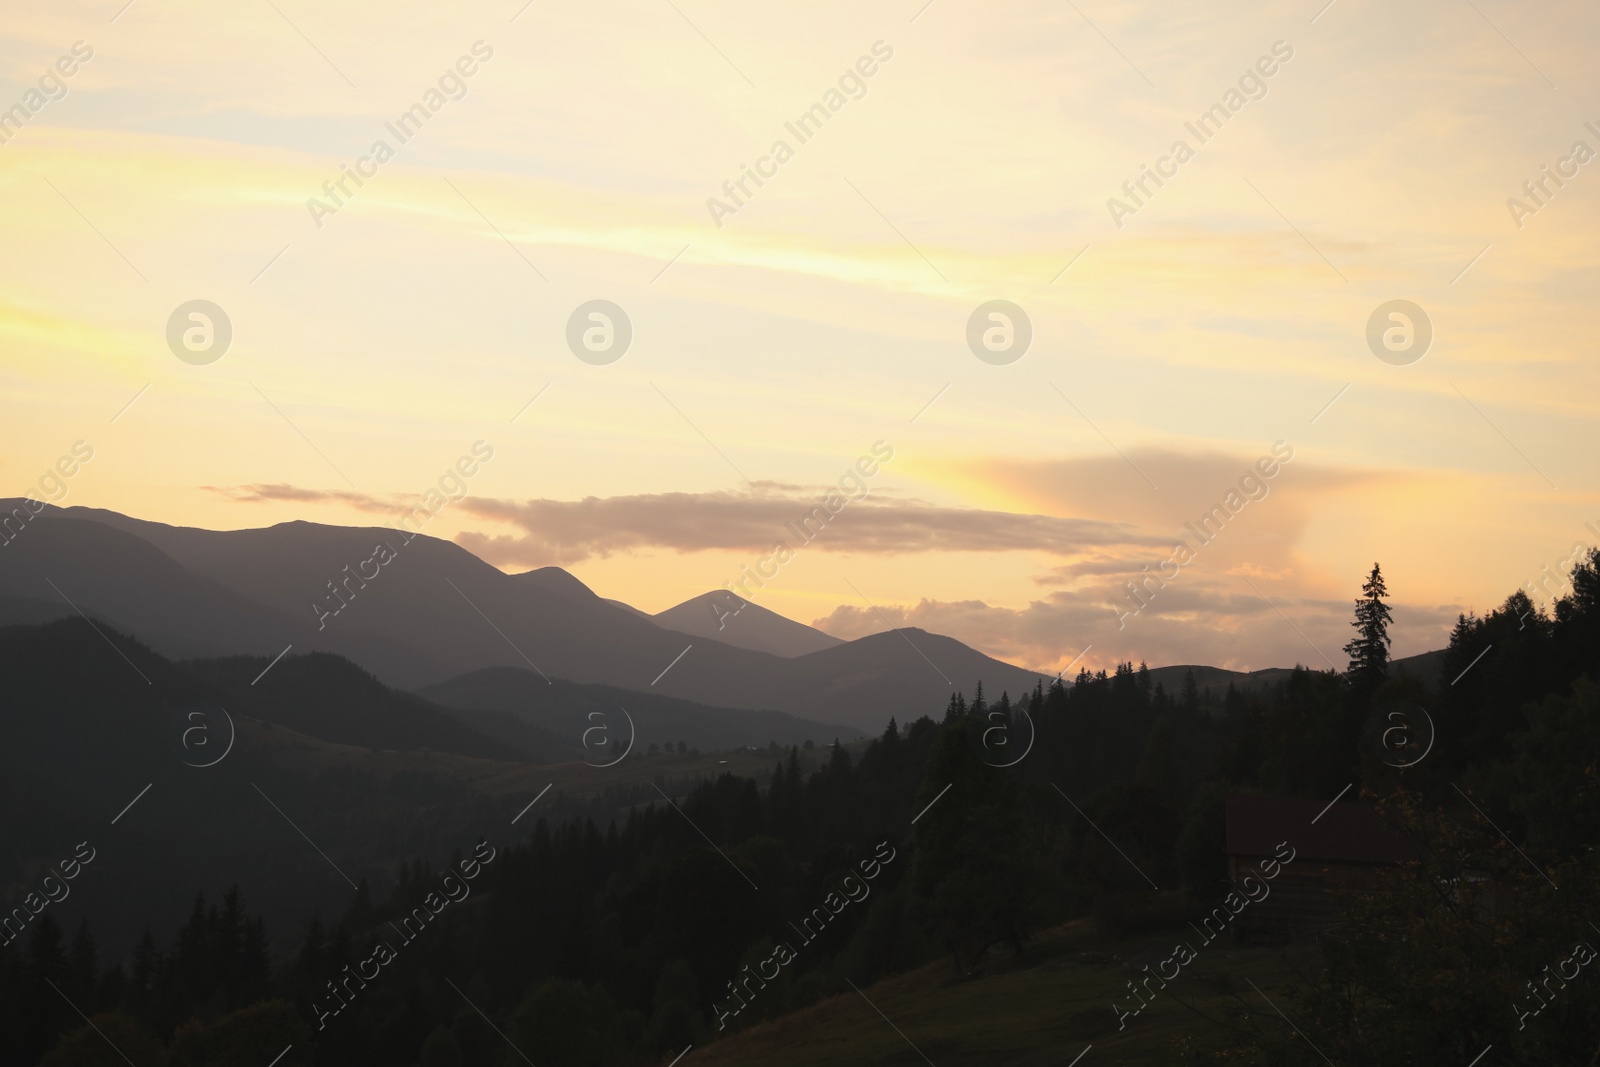 Photo of Picturesque view of mountains under beautiful sky in early morning